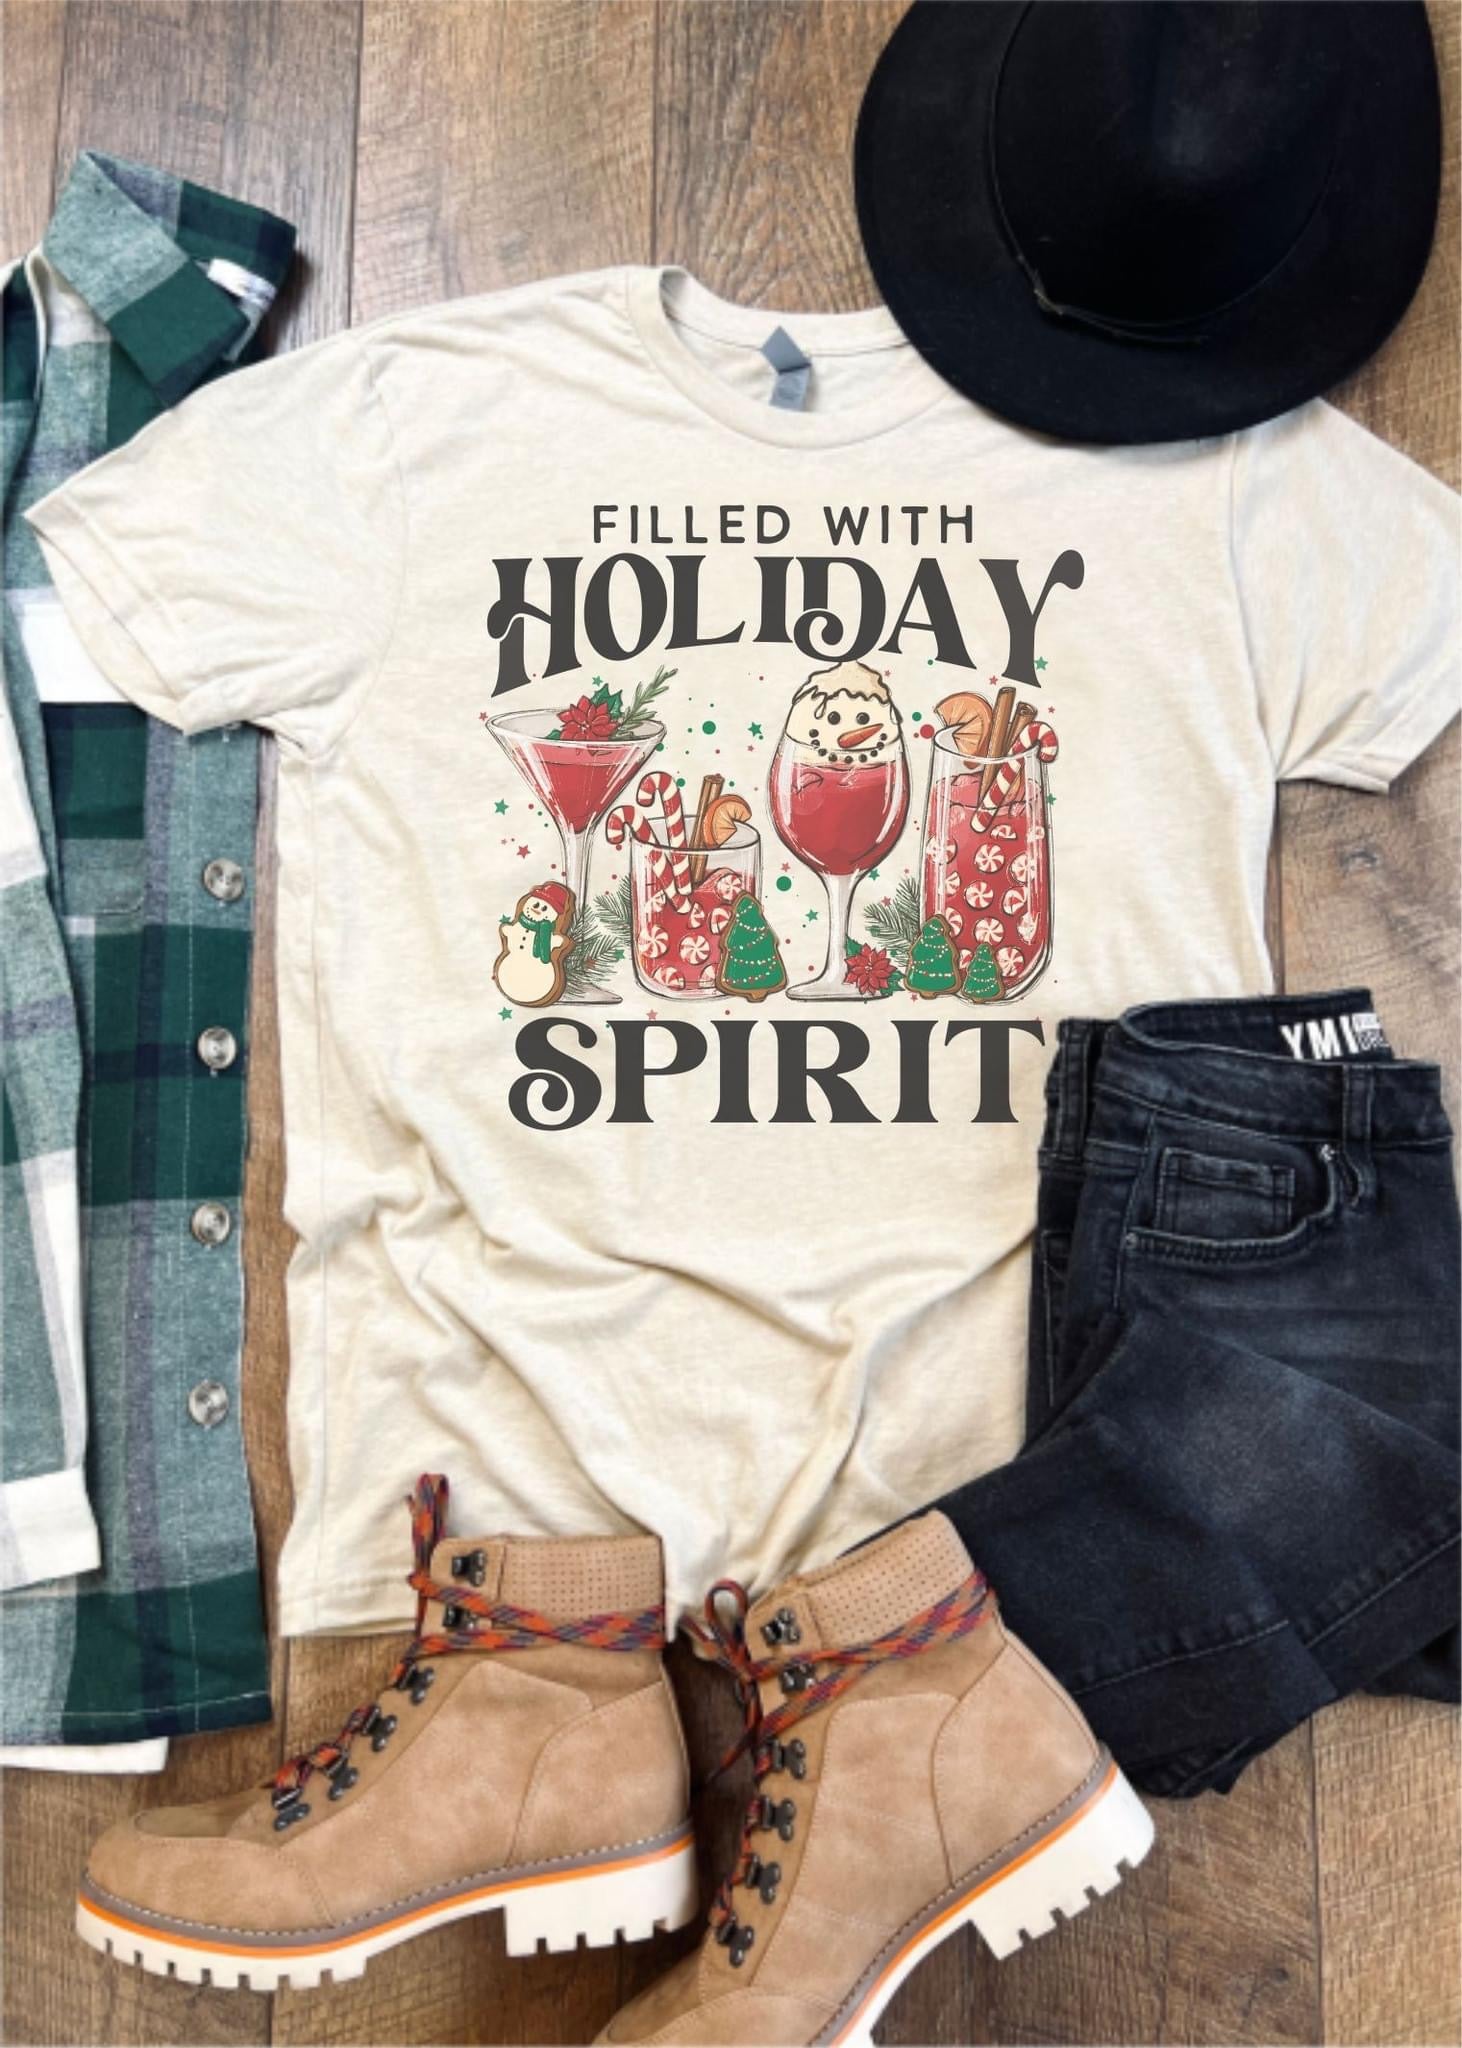 boutique shopping pensacola festive fill holiday spirit tee t-shirt graphic drinks